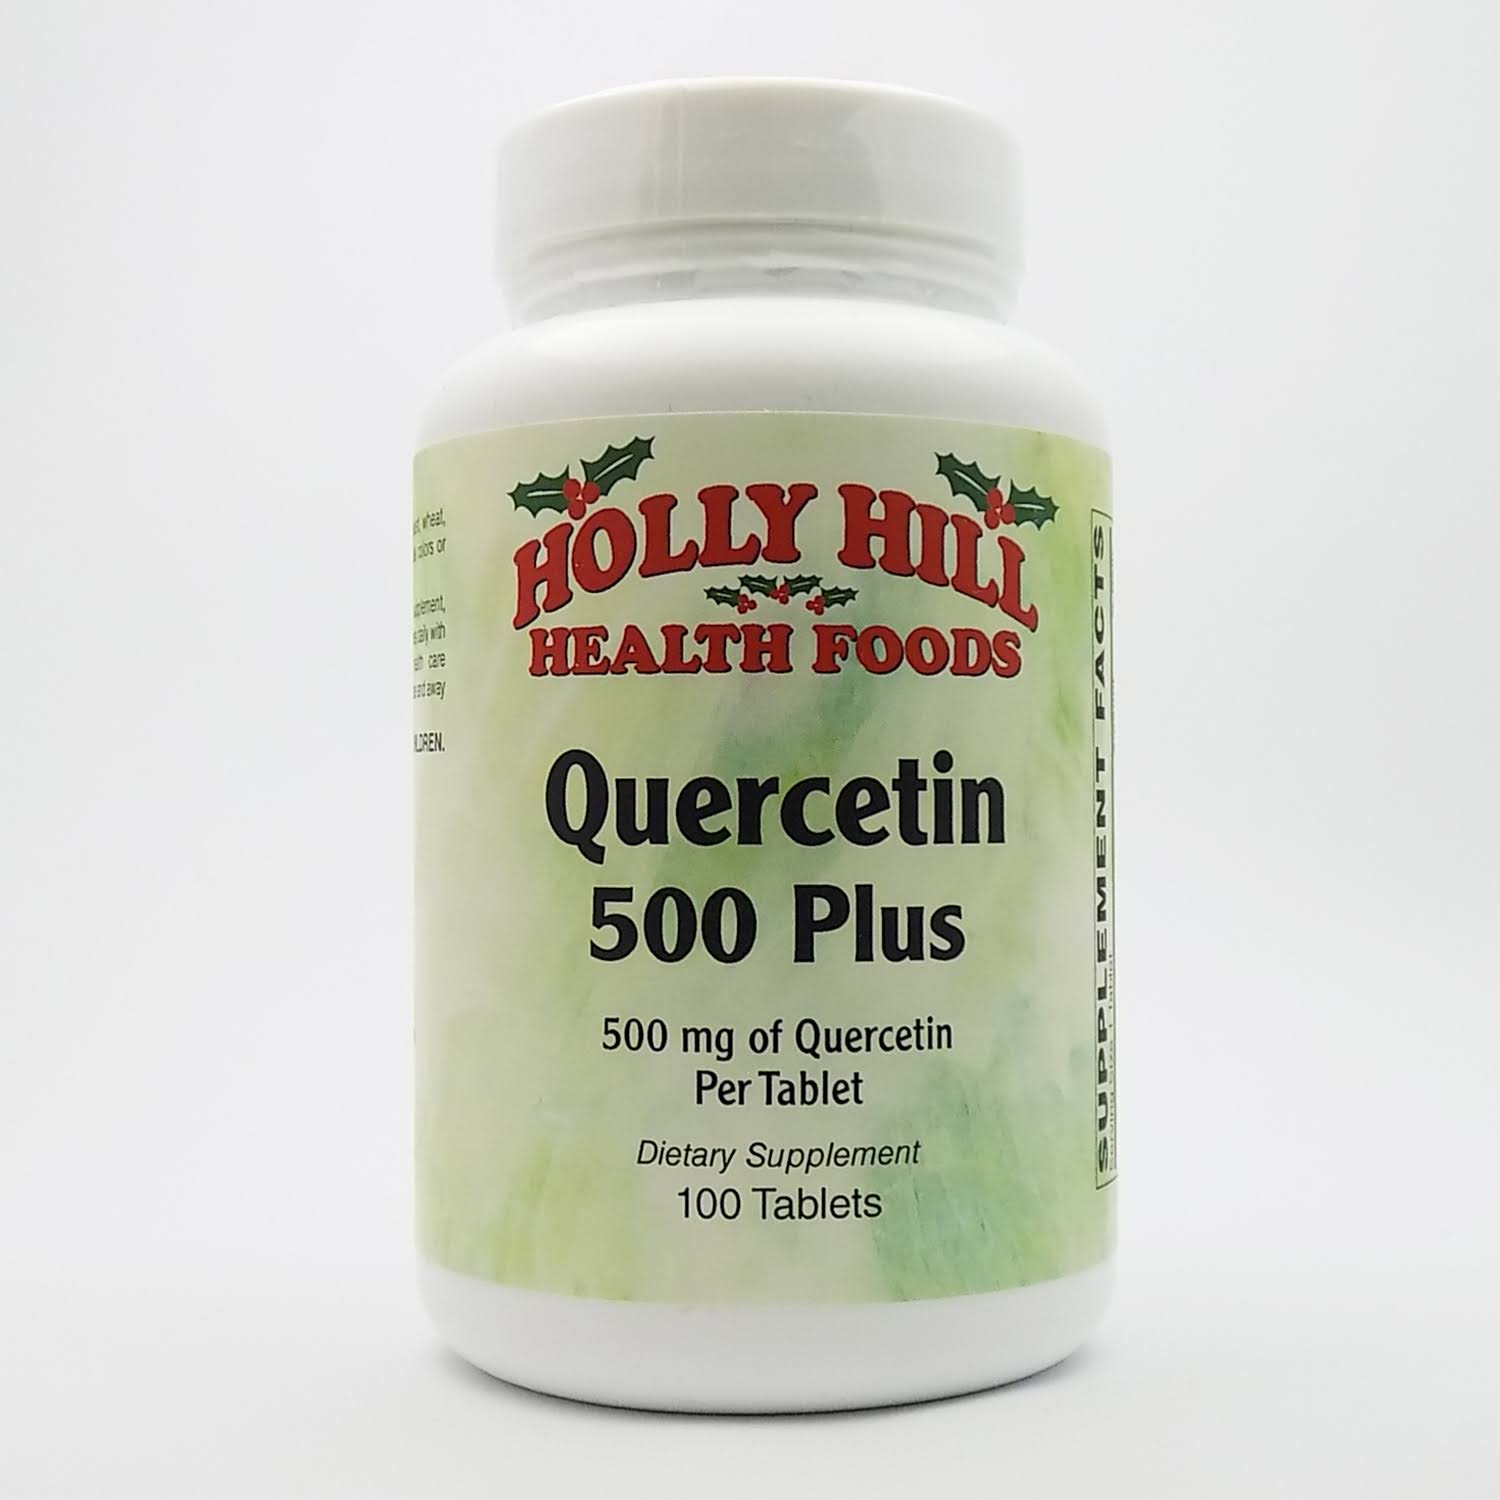 Holly Hill Health Foods, Quercetin Plus 500 mg, 100 Tablets